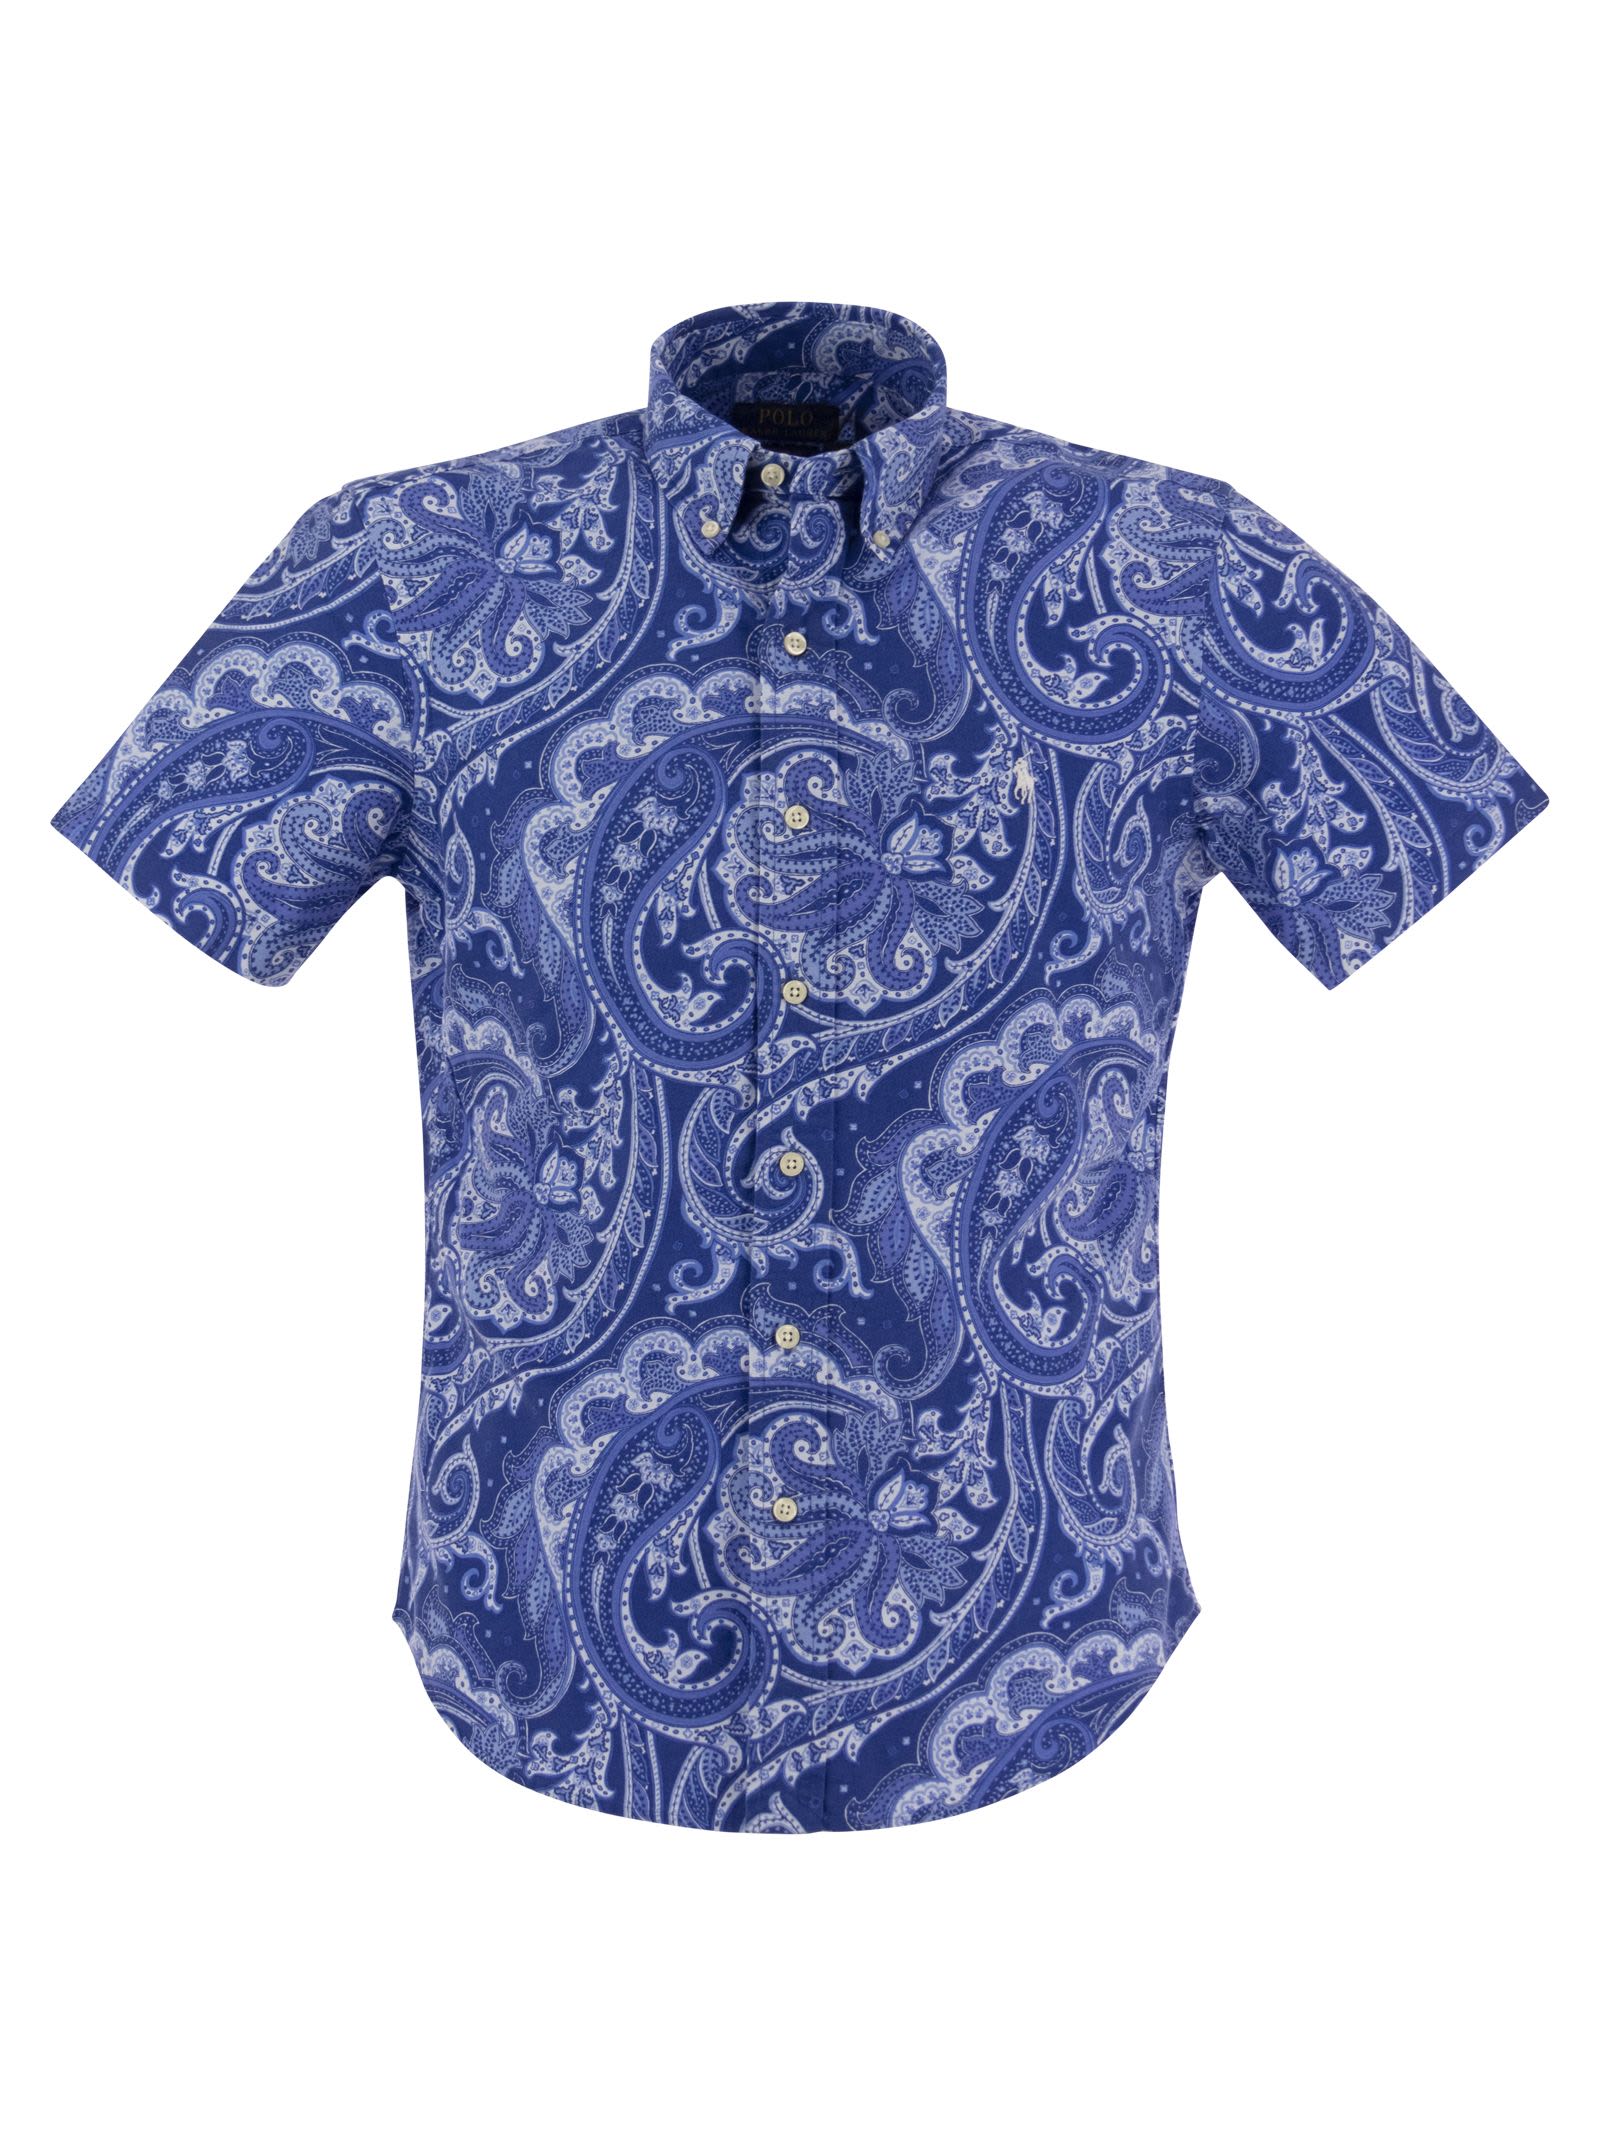 POLO RALPH LAUREN SHORT-SLEEVED SHIRT WITH CASHMERE PATTERN